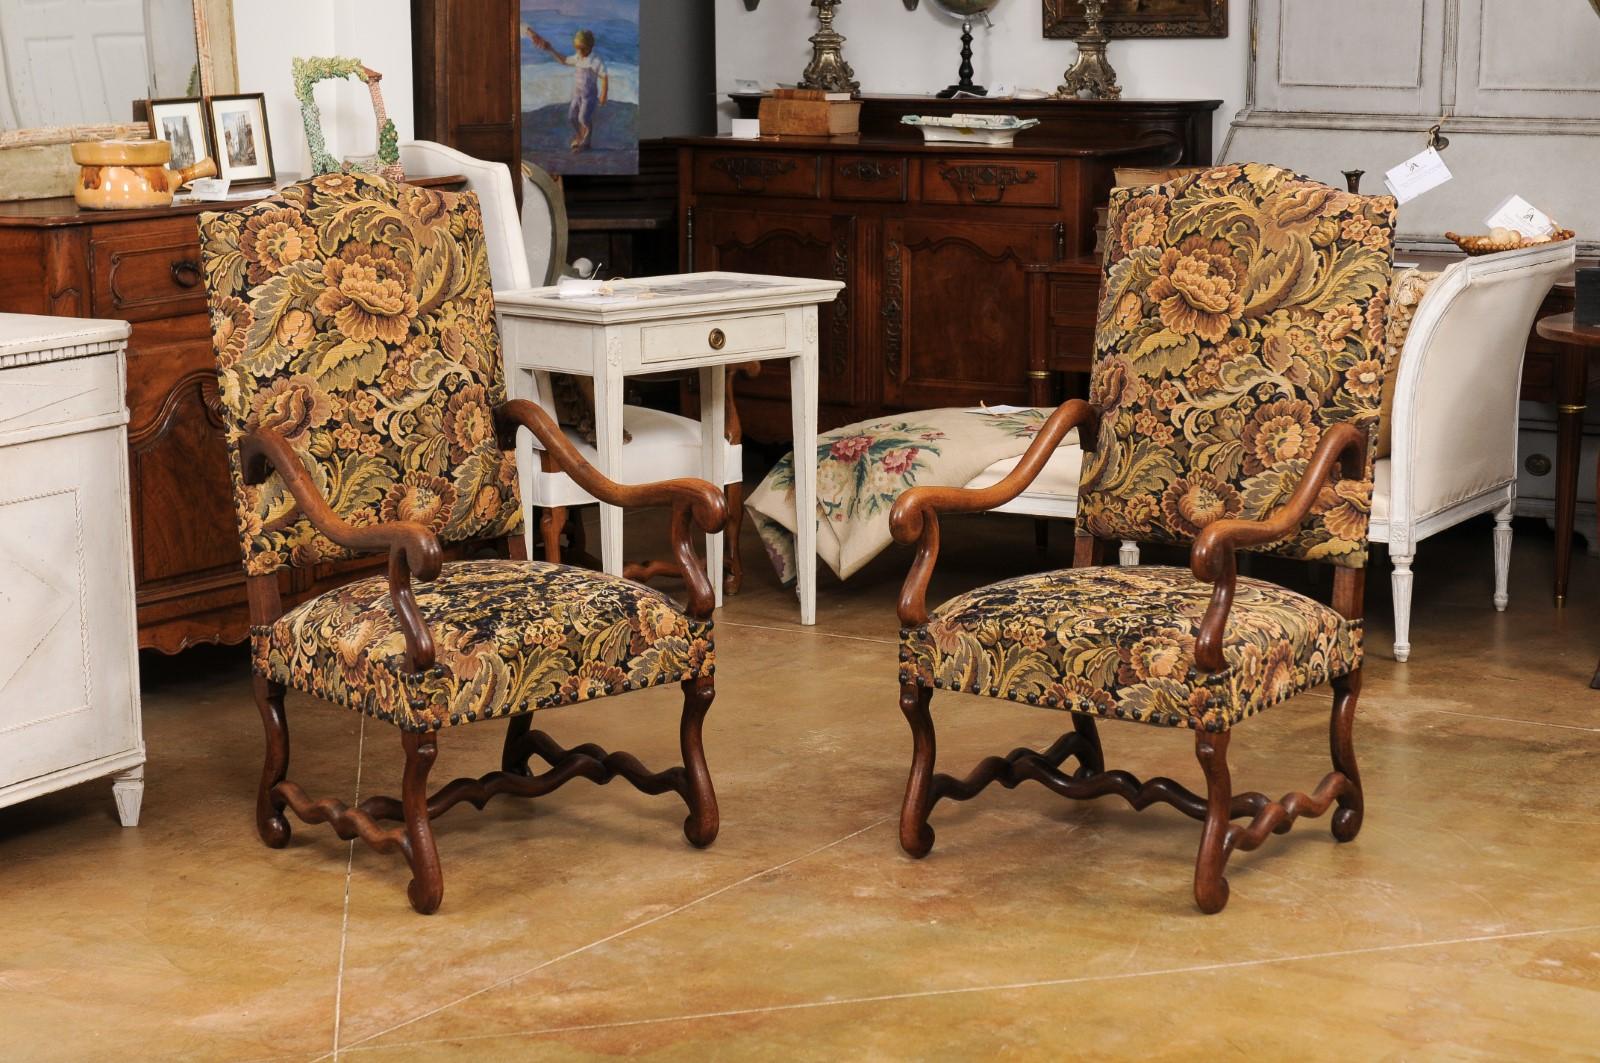 A pair of French Louis XIII style wooden os de mouton armchairs from the 19th century, with slanted camelbacks, large scrolling arms, cross stretchers and used upholstery. Created in France during the 19th century, this pair of fauteuils showcases